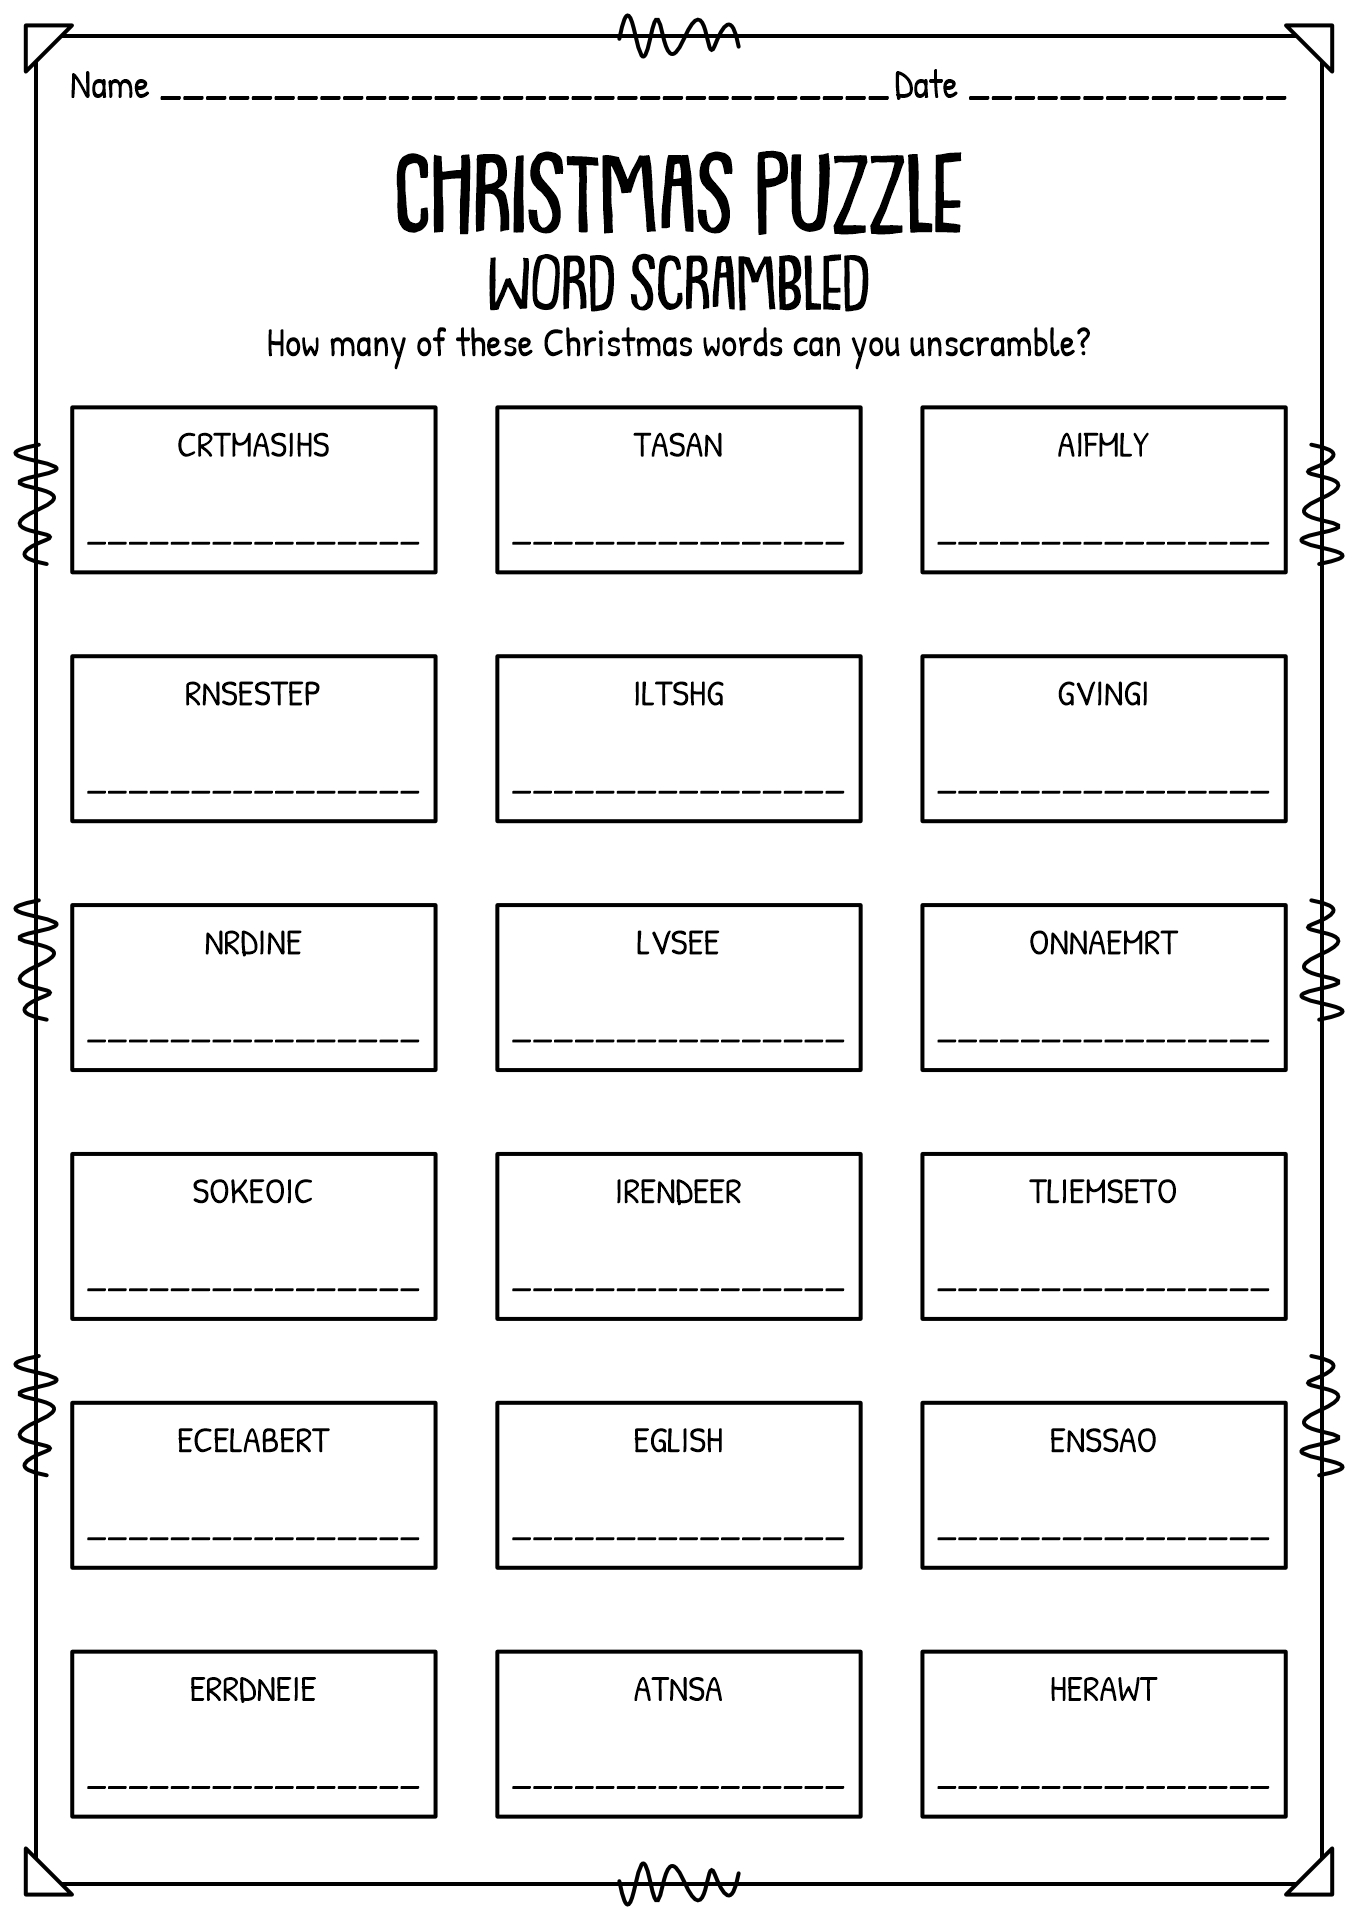 17-best-images-of-brain-teasers-worksheets-hidden-meaning-brain